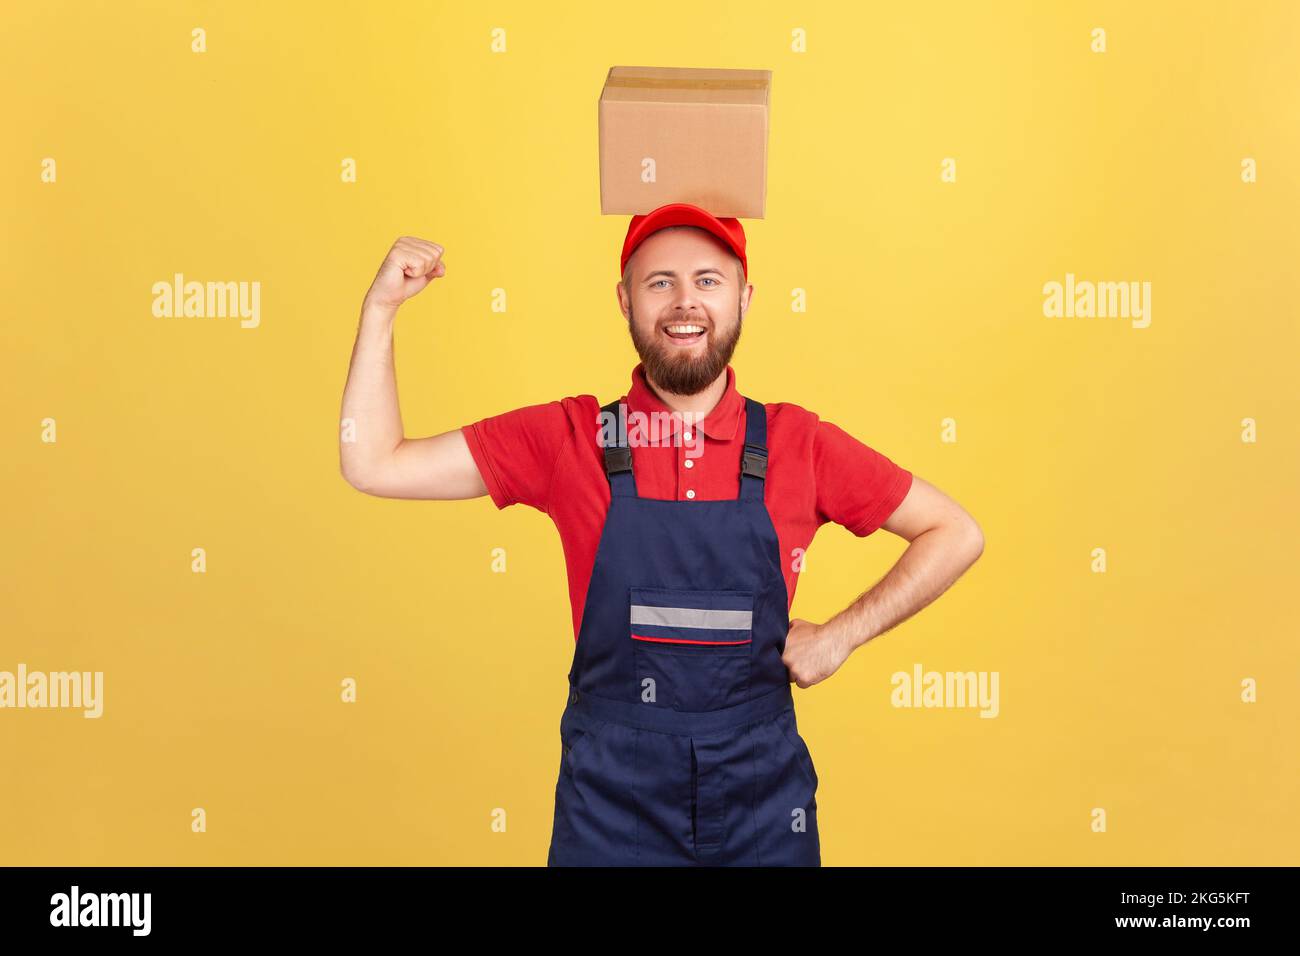 Portrait of strong courier man wearing blue uniform standing with cardboard box on his head, looking at camera, raised arm showing his power. Indoor studio shot isolated on yellow background. Stock Photo